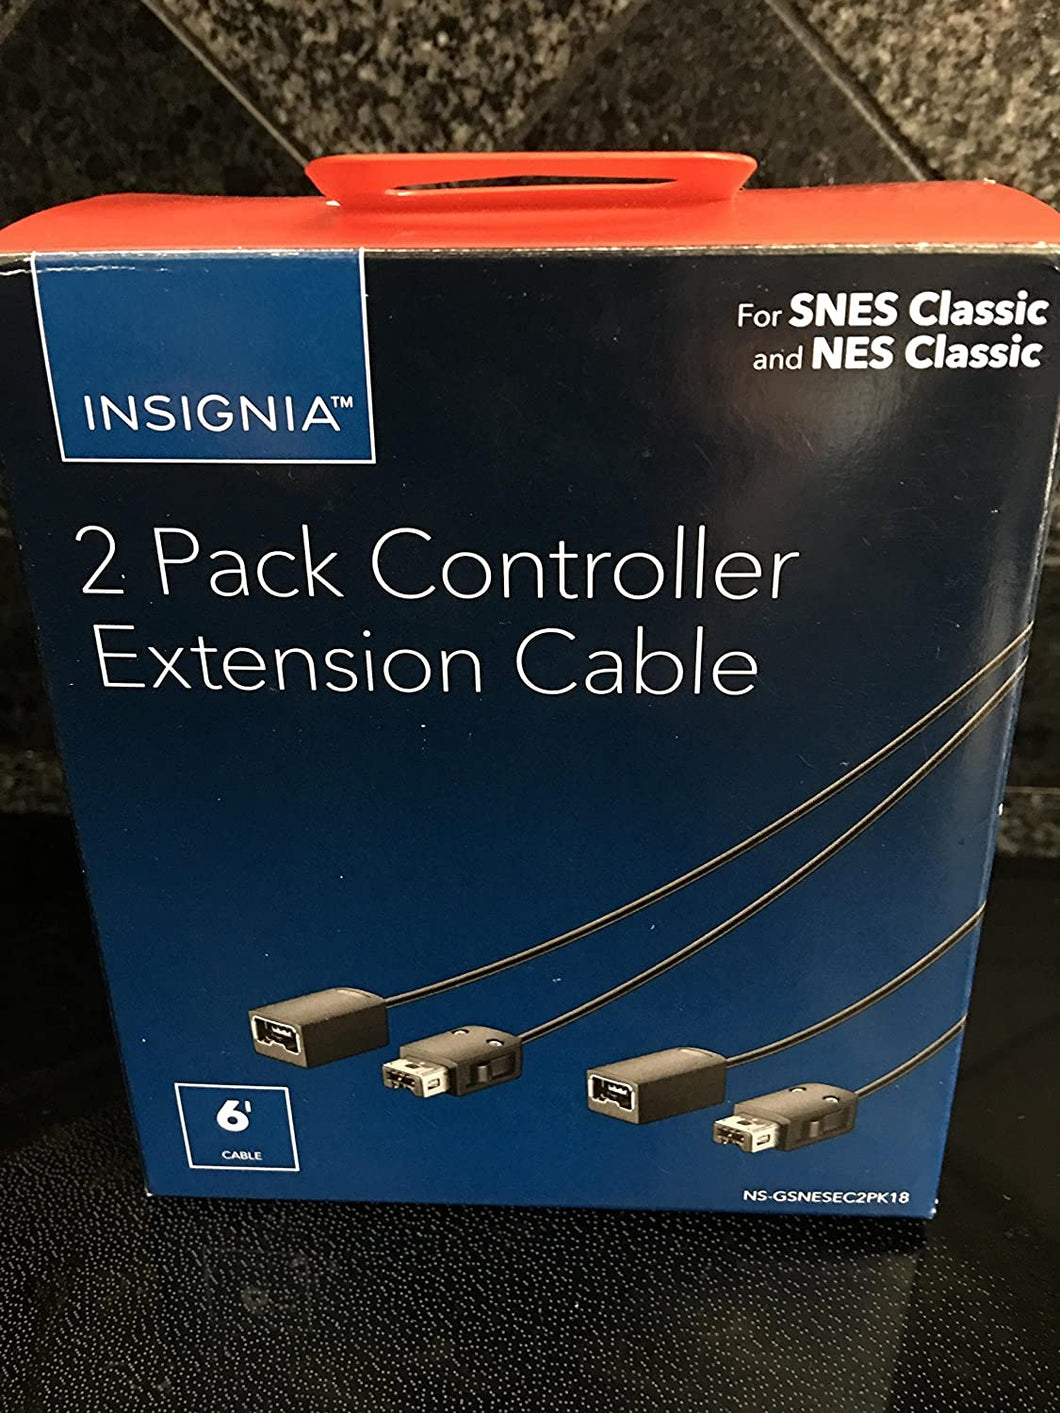 insignia 2 pack controller extension cable